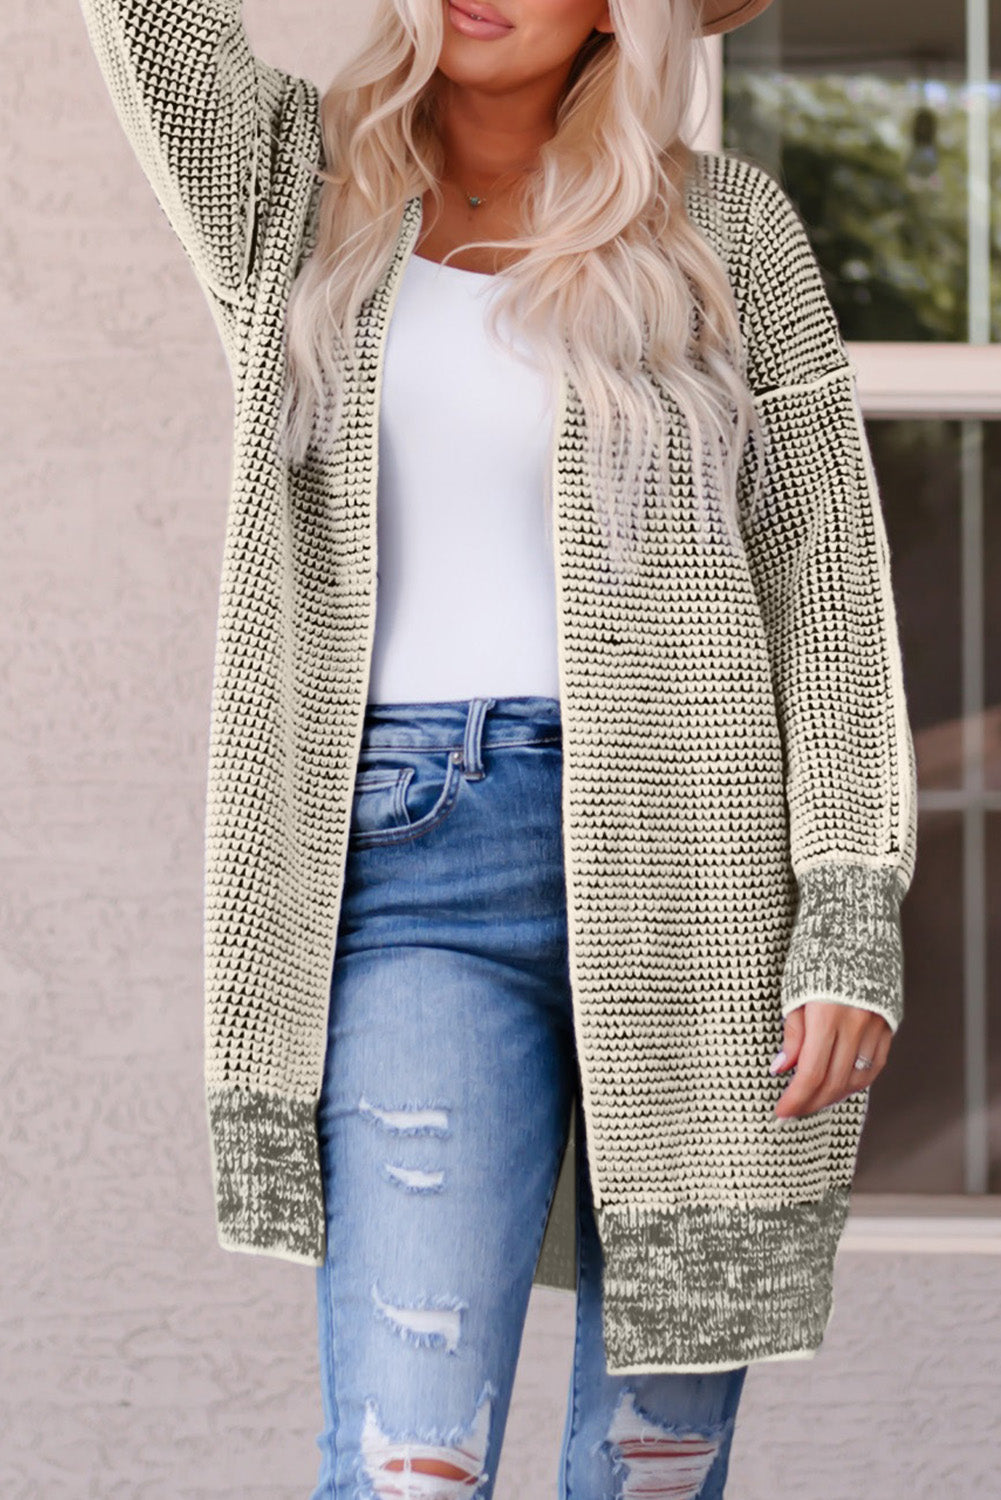 Rose Plaid Knitted Long Open Front Cardigan